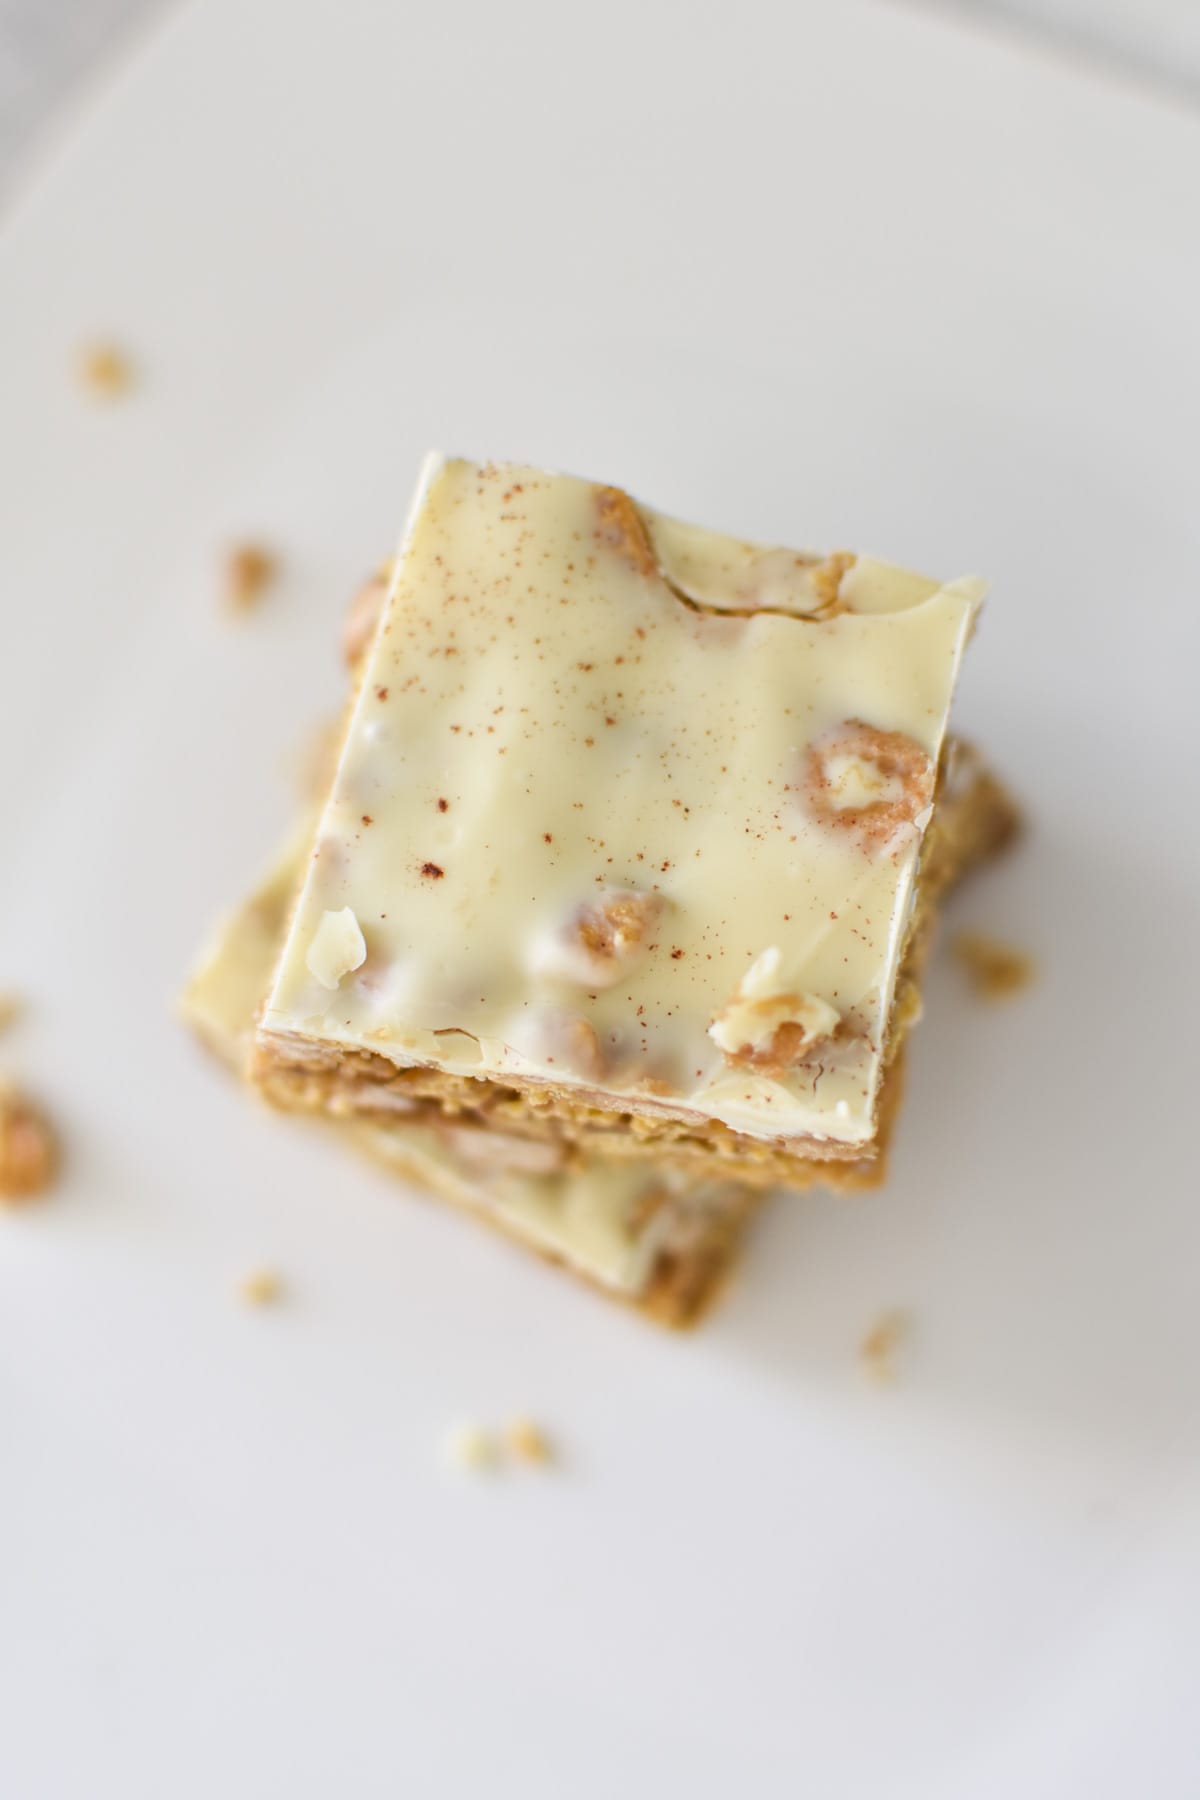 White chocolate cereal bar on a plate.